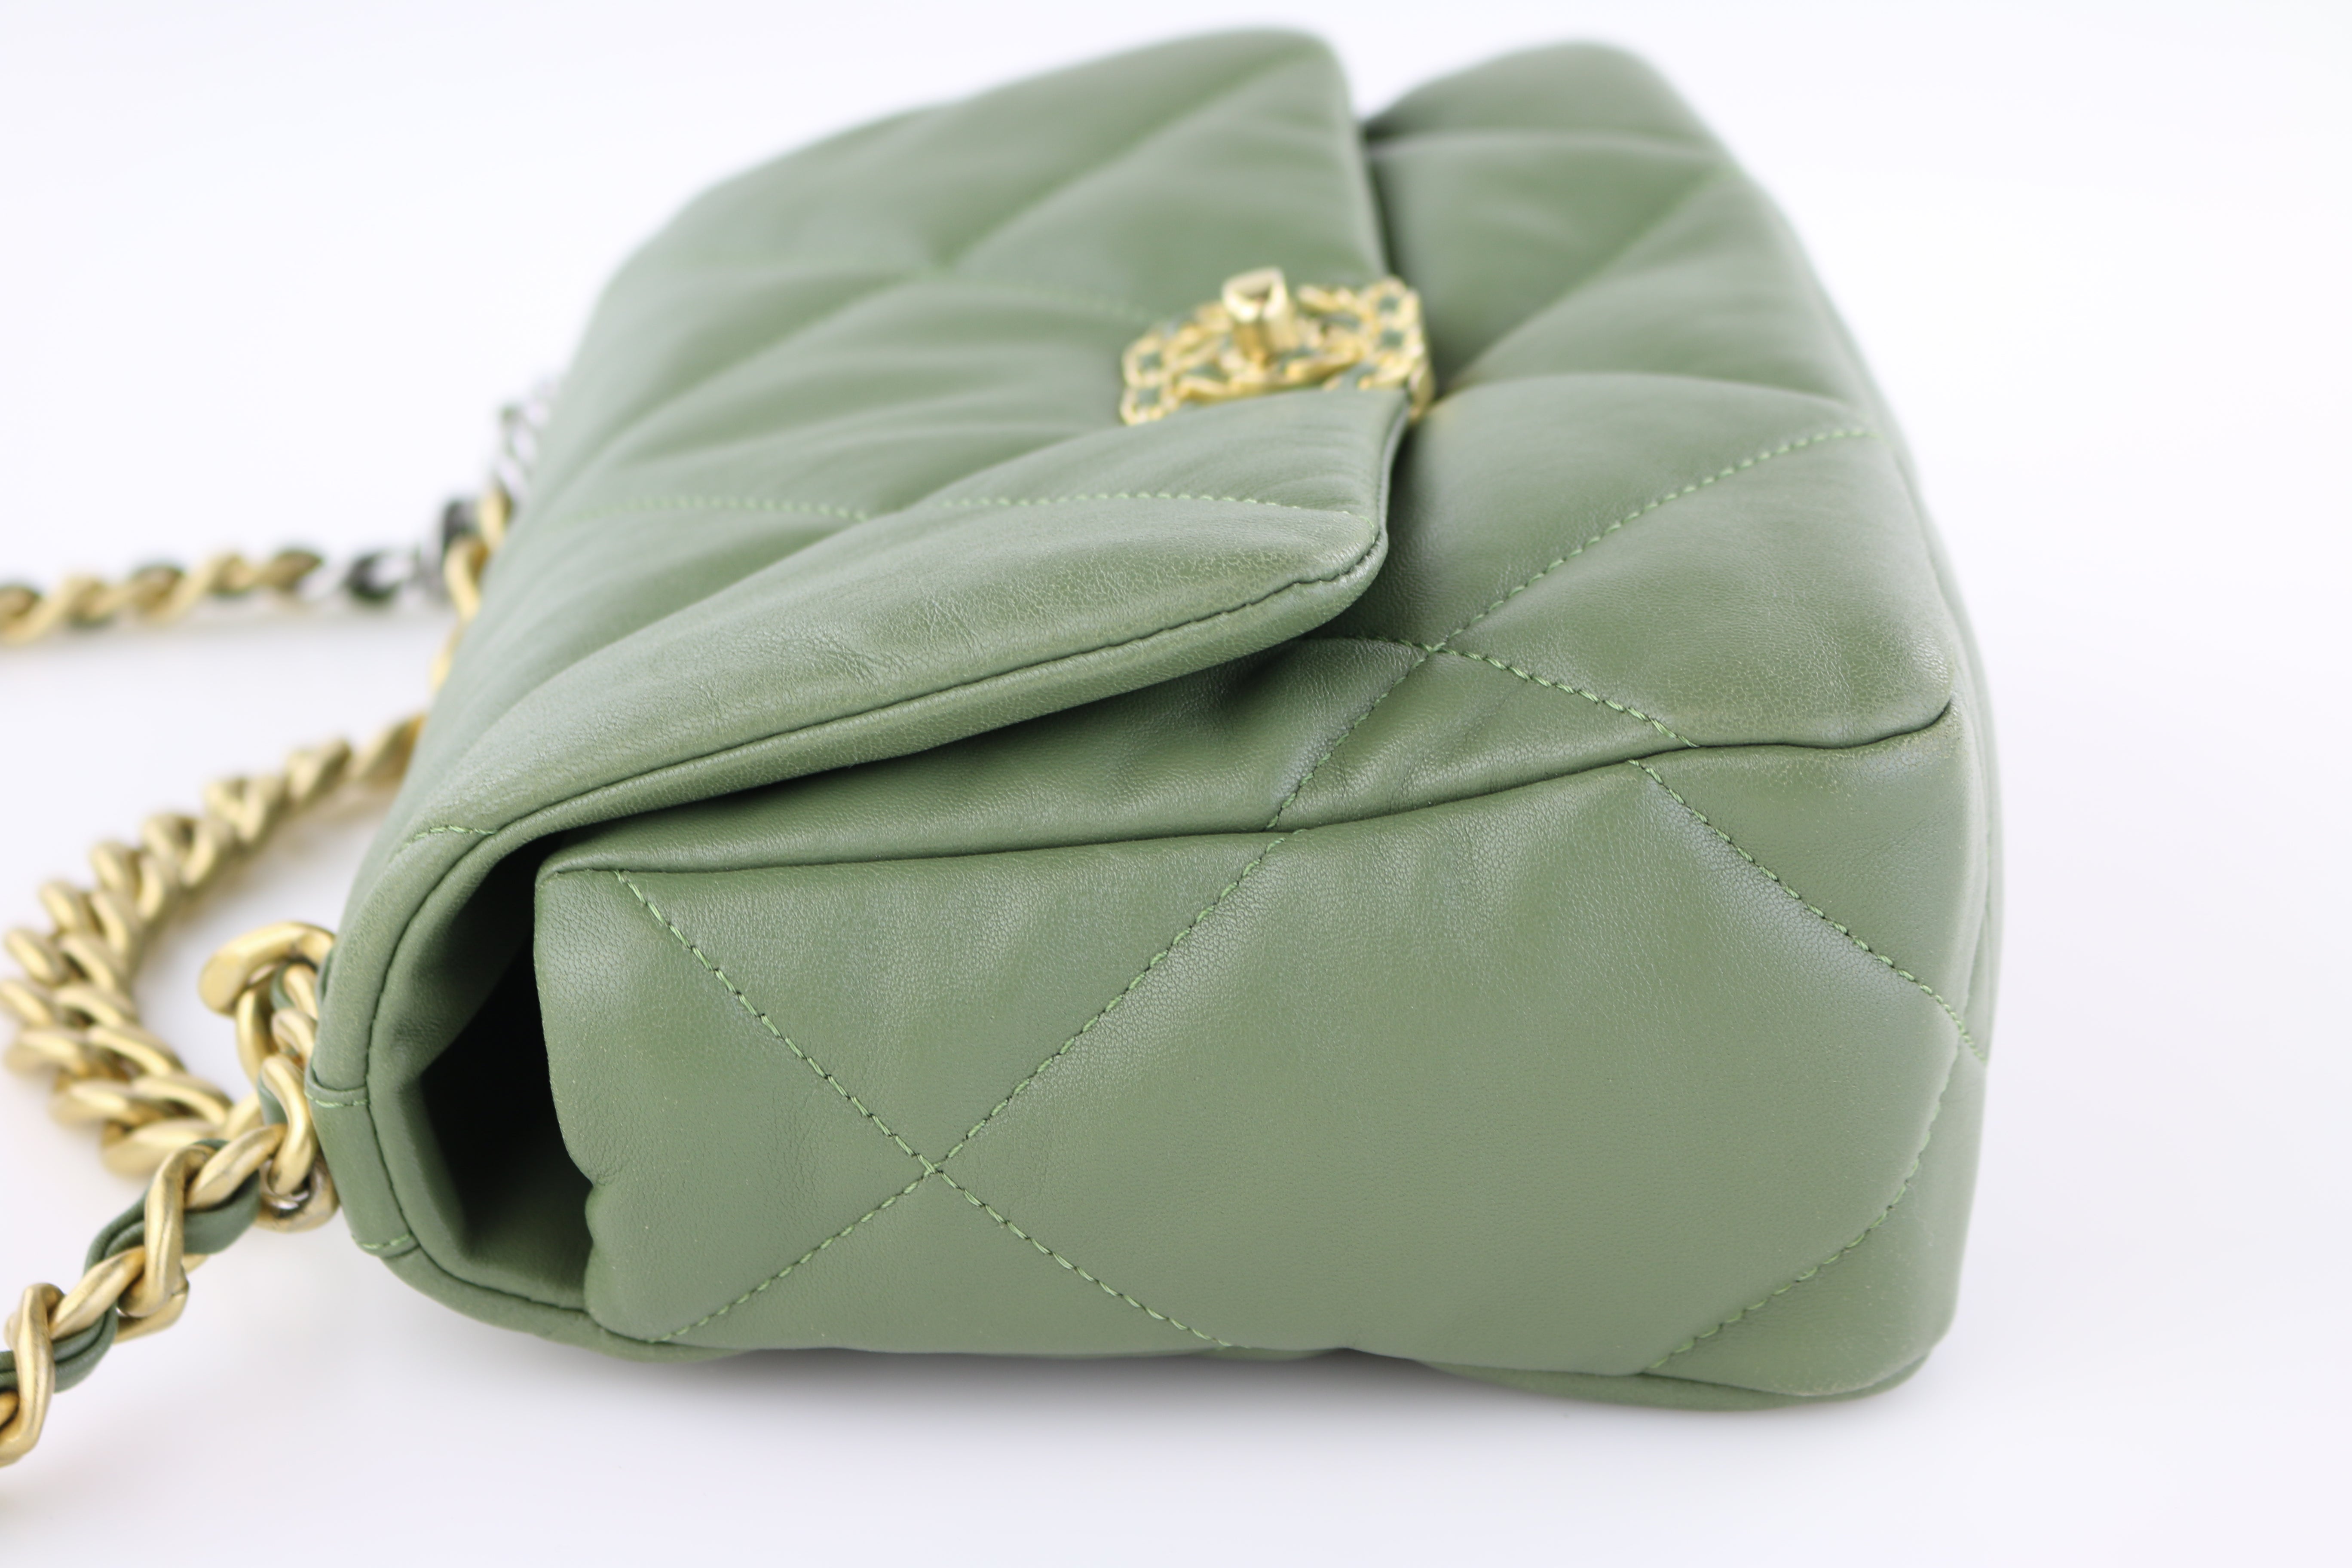 Chanel 19 leather handbag Chanel Green in Leather - 34968035